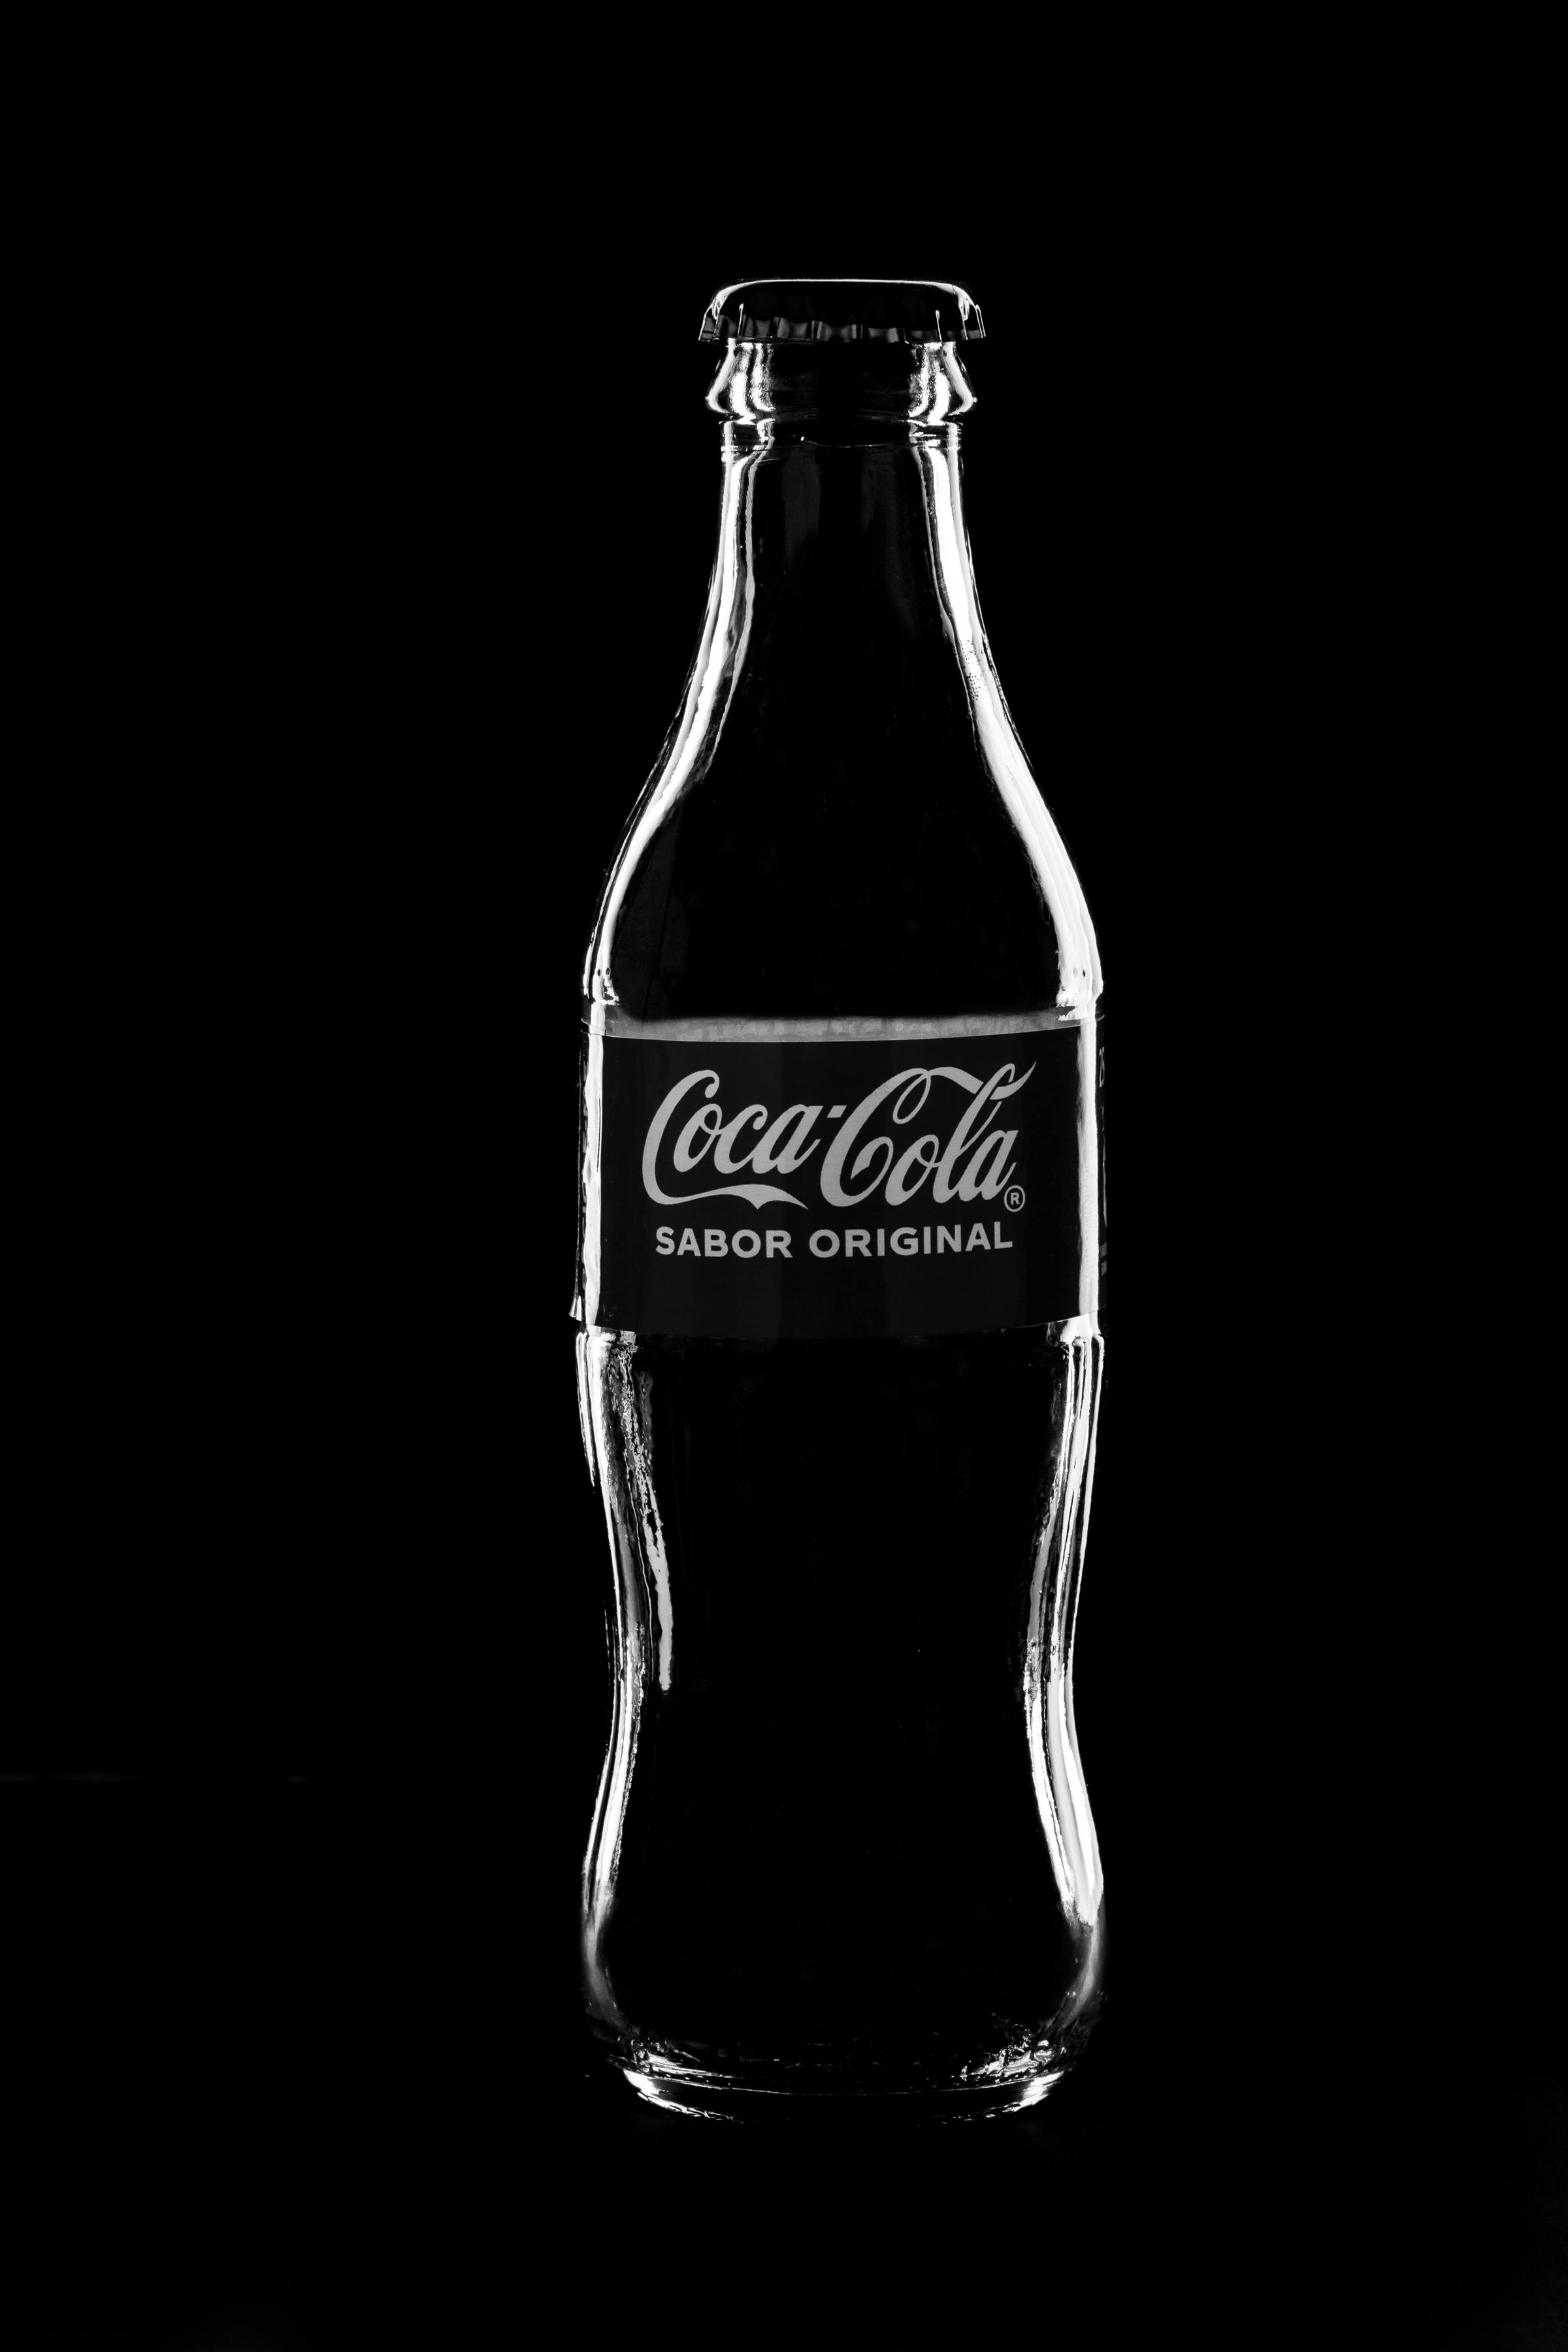 Just a glass of Coca Cola : r/blender